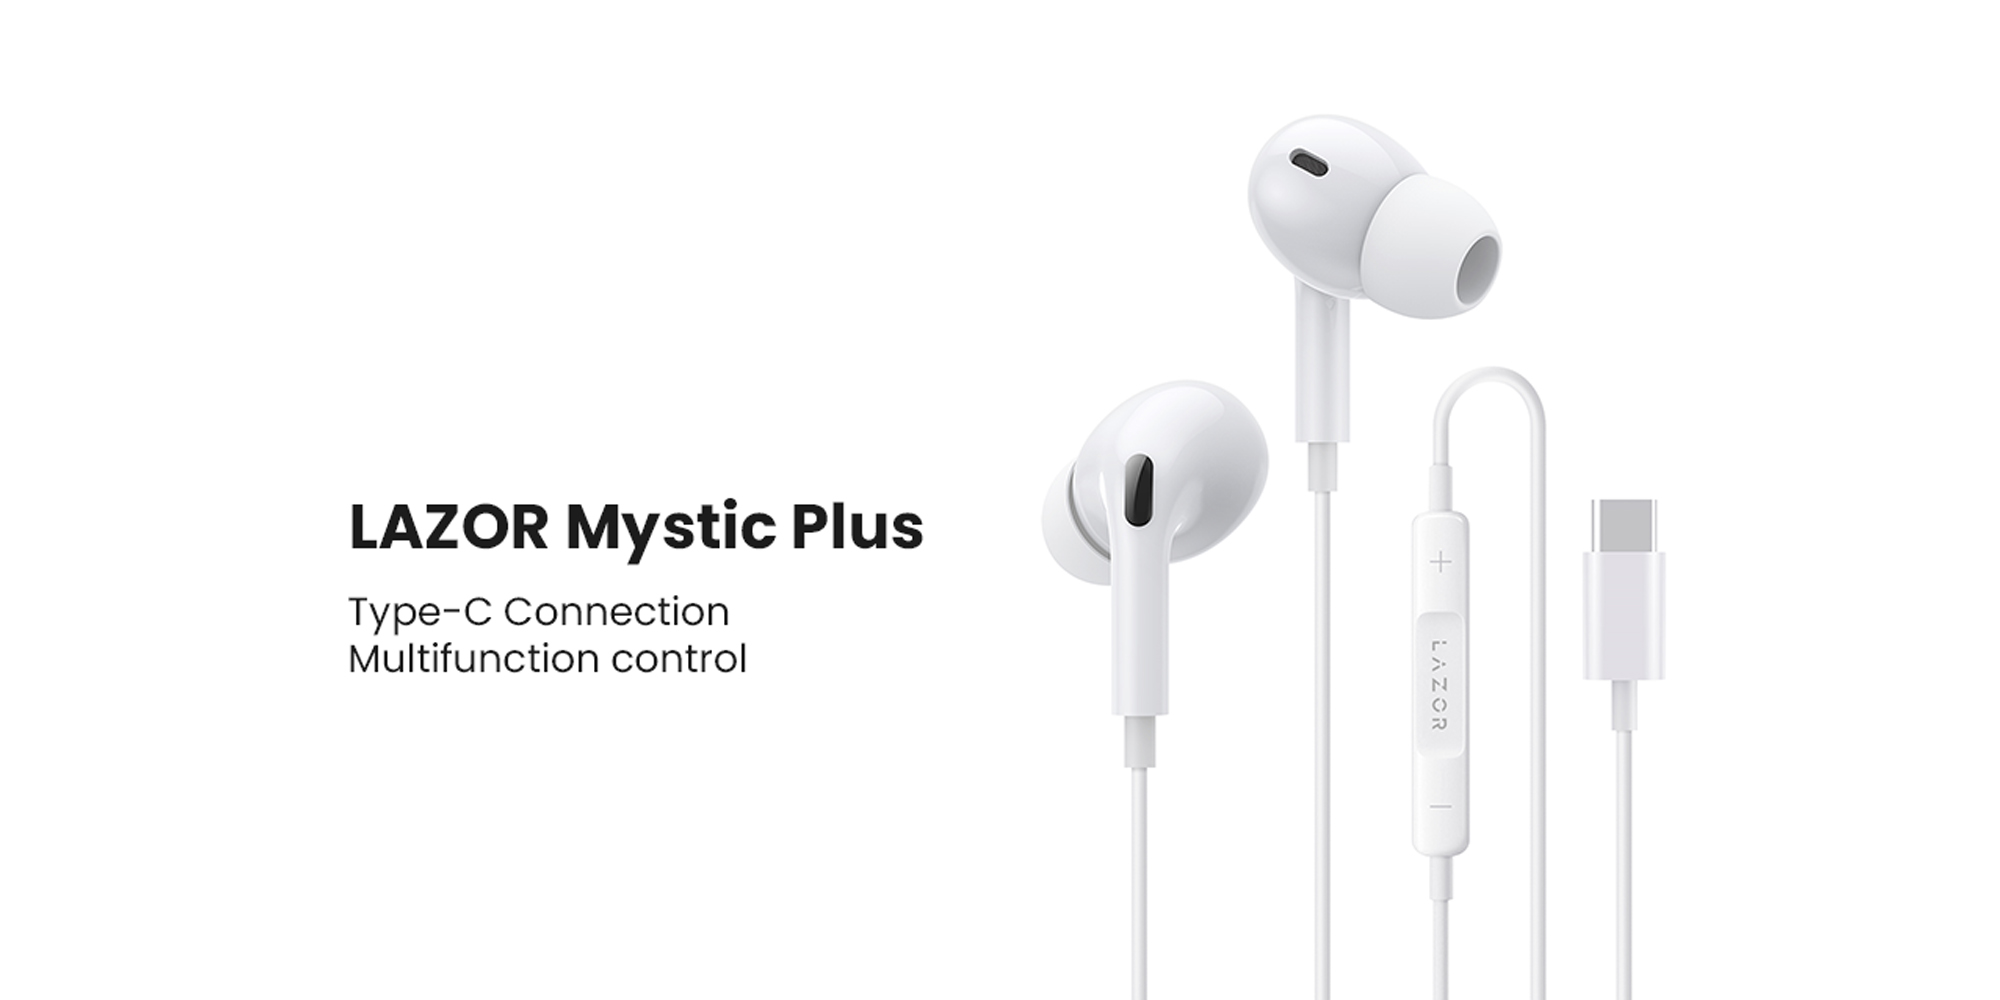 LAZOR MYSTIC Plus EA162: Type-C In-Ear Wired Headphones with Microphone, HiFi Stereo Sound, In-Line Control, Soft PVC with Stereo Sound Driver - White, 1.2M